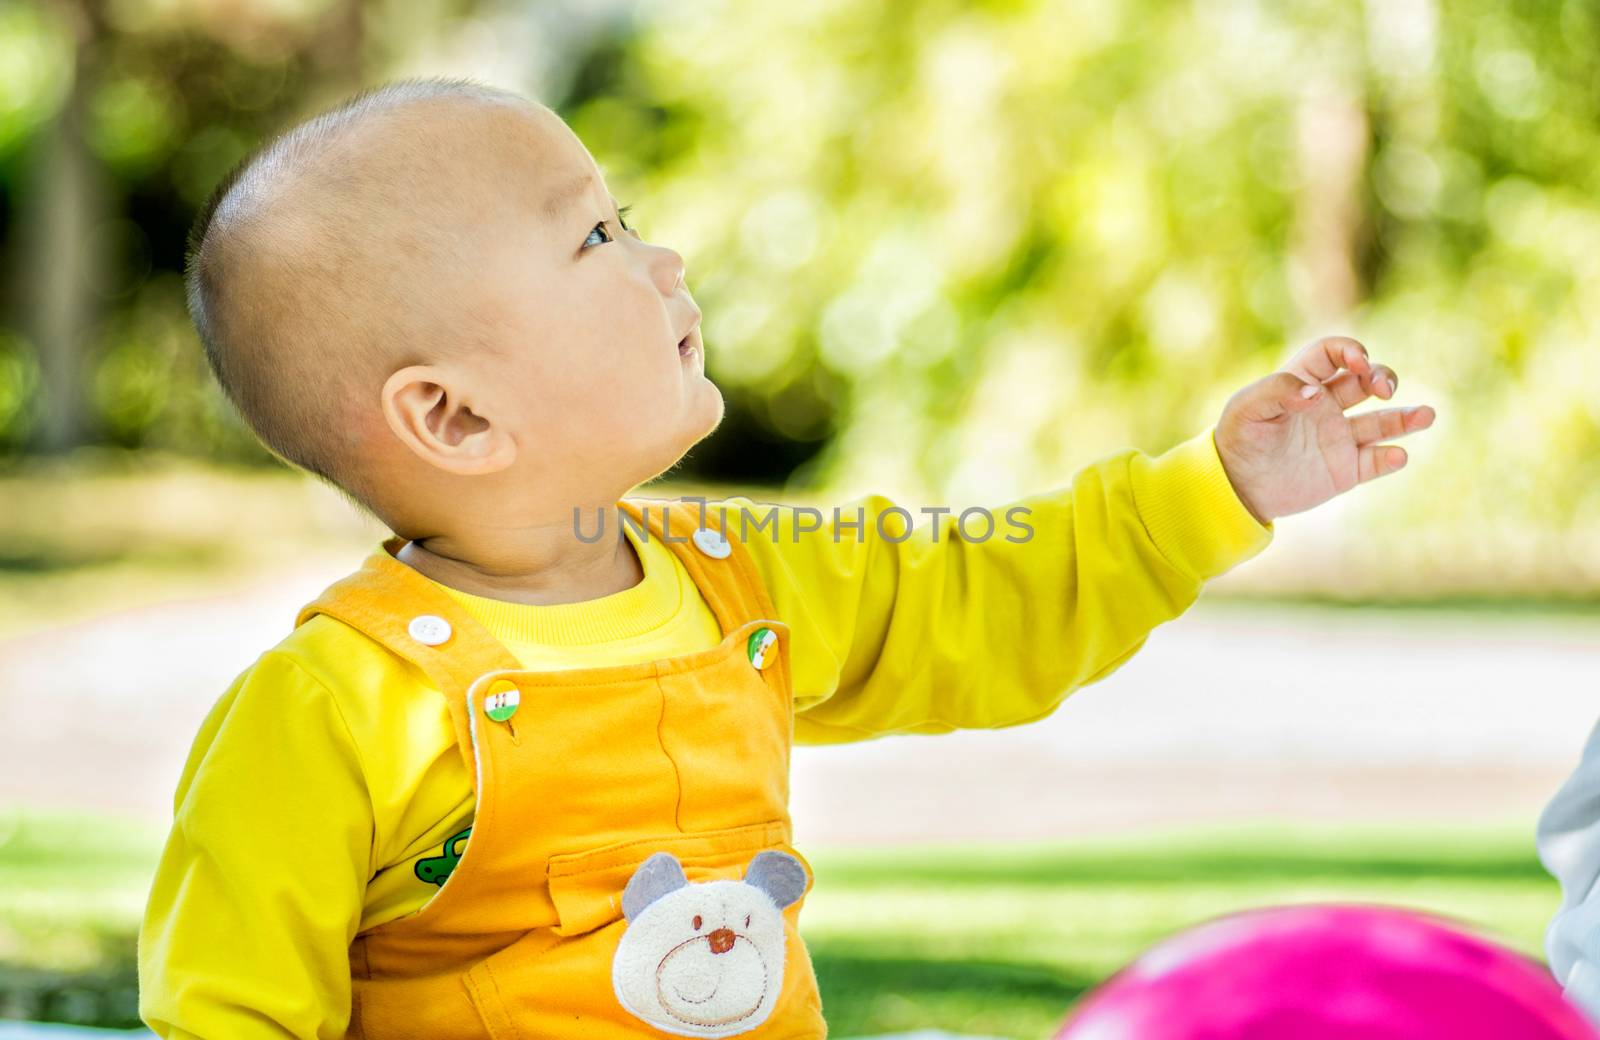 a baby sits on the mat in the park stretching a hand